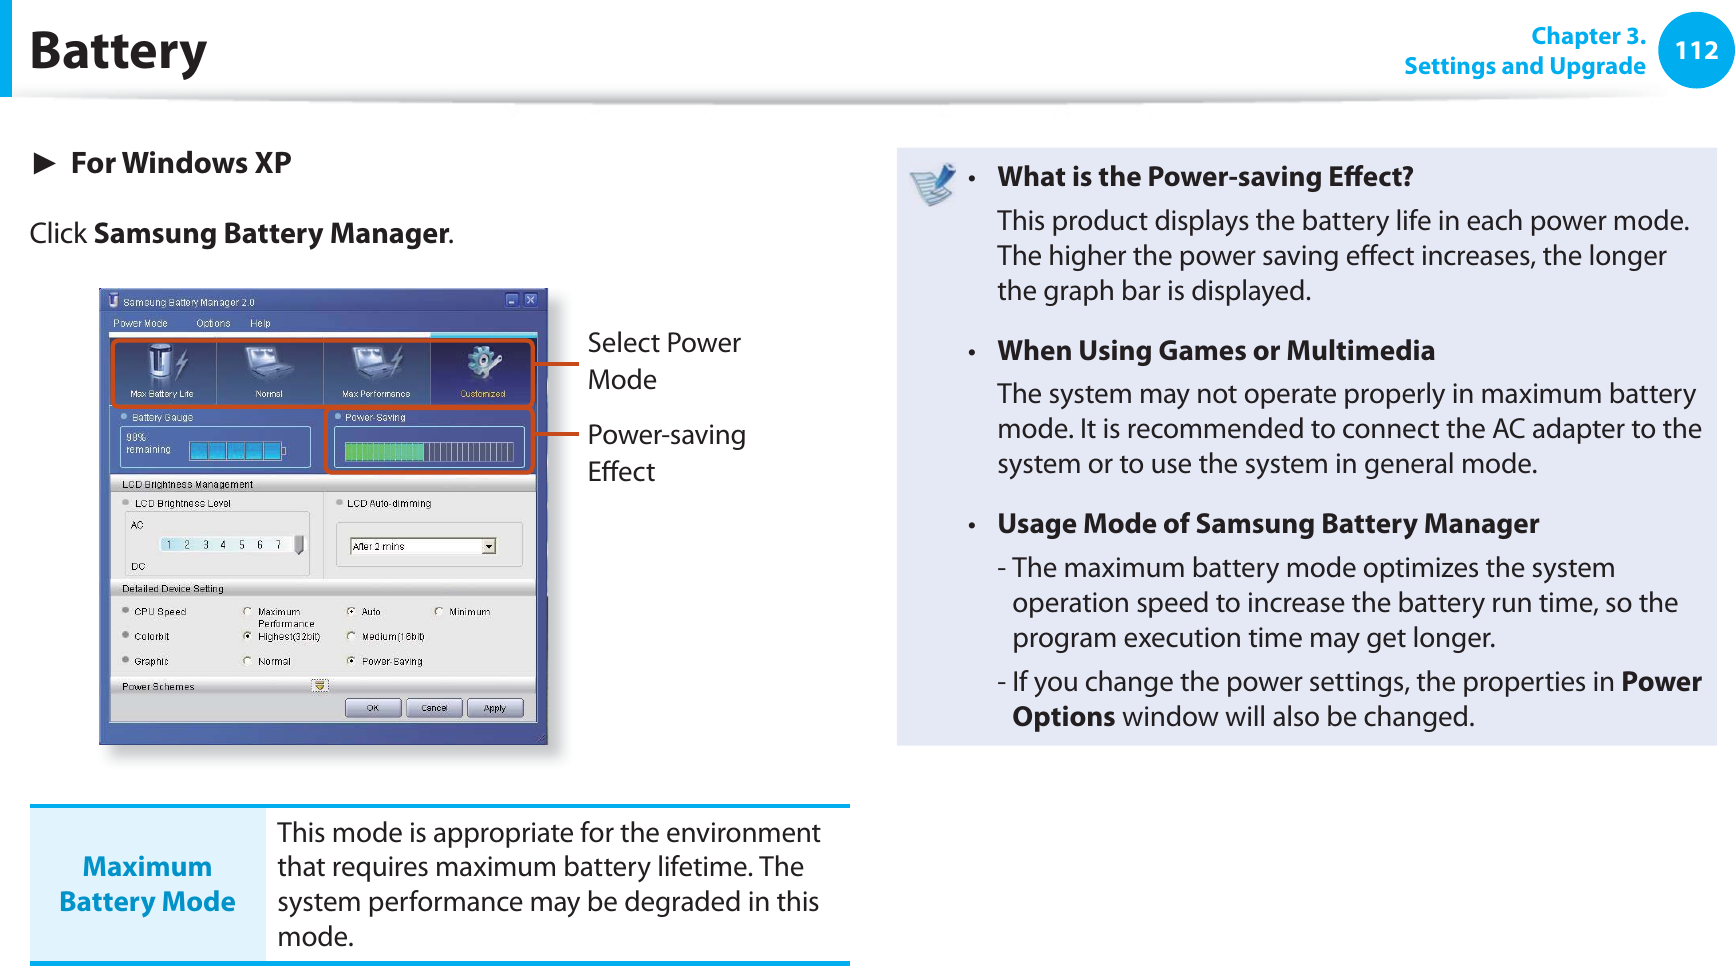 112 Chapter  3.Settings and UpgradeBattery► For Windows XPClick Samsung Battery Manager.Select Power ModePower-saving Eﬀ ectMaximum Battery ModeThis mode is appropriate for the environment that requires maximum battery lifetime. The system performance may be degraded in this mode.What is the Power-saving Eﬀ ect?t   This product displays the battery life in each power mode. The higher the power saving eﬀ ect increases, the longer the graph bar is displayed.When Using Games or Multimediat   The system may not operate properly in maximum battery mode. It is recommended to connect the AC adapter to the system or to use the system in general mode.Usage Mode of Samsung Battery Managert   -  The maximum battery mode optimizes the system operation speed to increase the battery run time, so the program execution time may get longer.  -  If you change the power settings, the properties in Power Options window will also be changed.